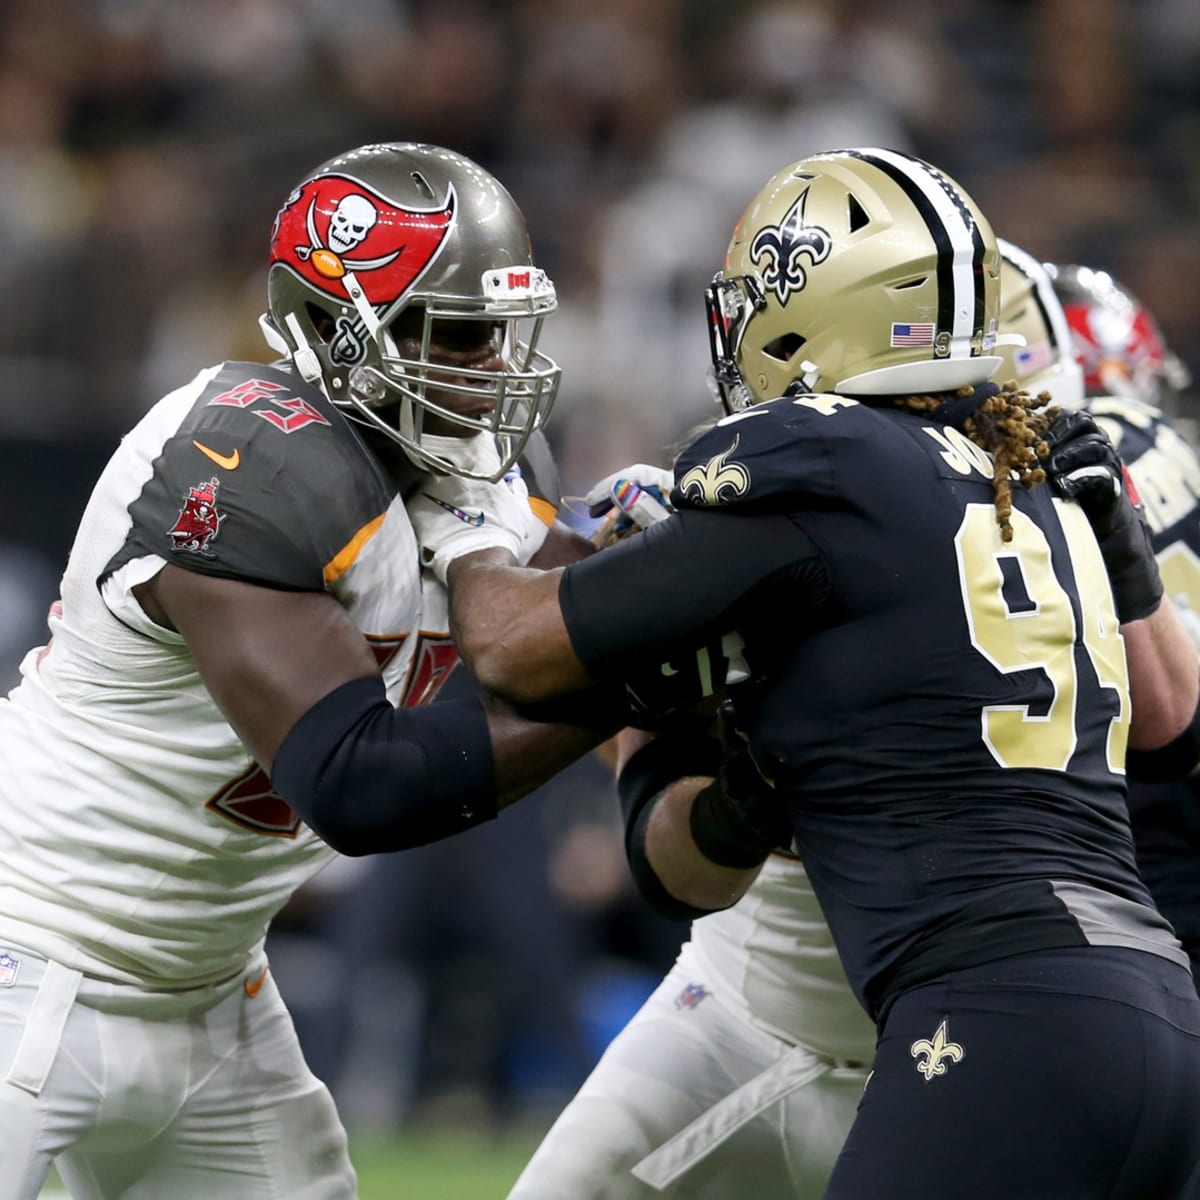 Free-agent right tackle Demar Dotson visits Broncos – The Denver Post